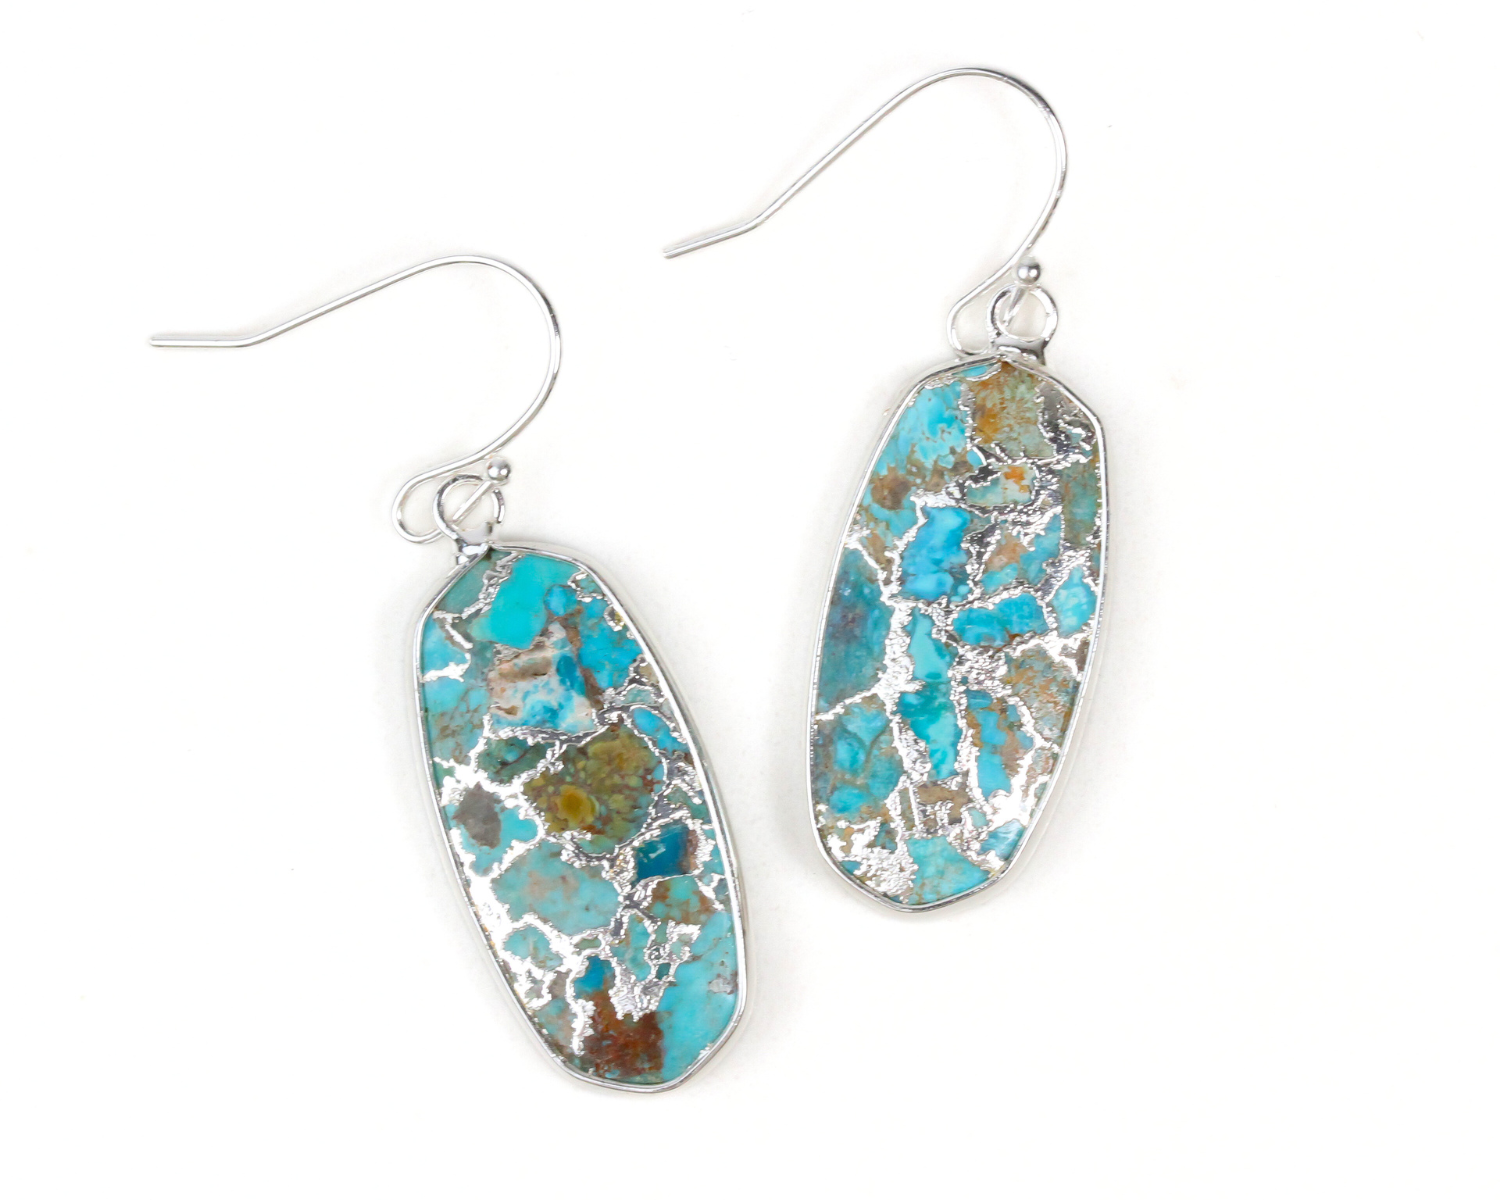 All of our handcrafted pieces come thoughtfully and beautifully packaged, ready for gifting. Imbued Turquoise Earrings blend earthy and elegant elements in perfect harmony. Turquoise holds a special place in our collection and in our hearts.